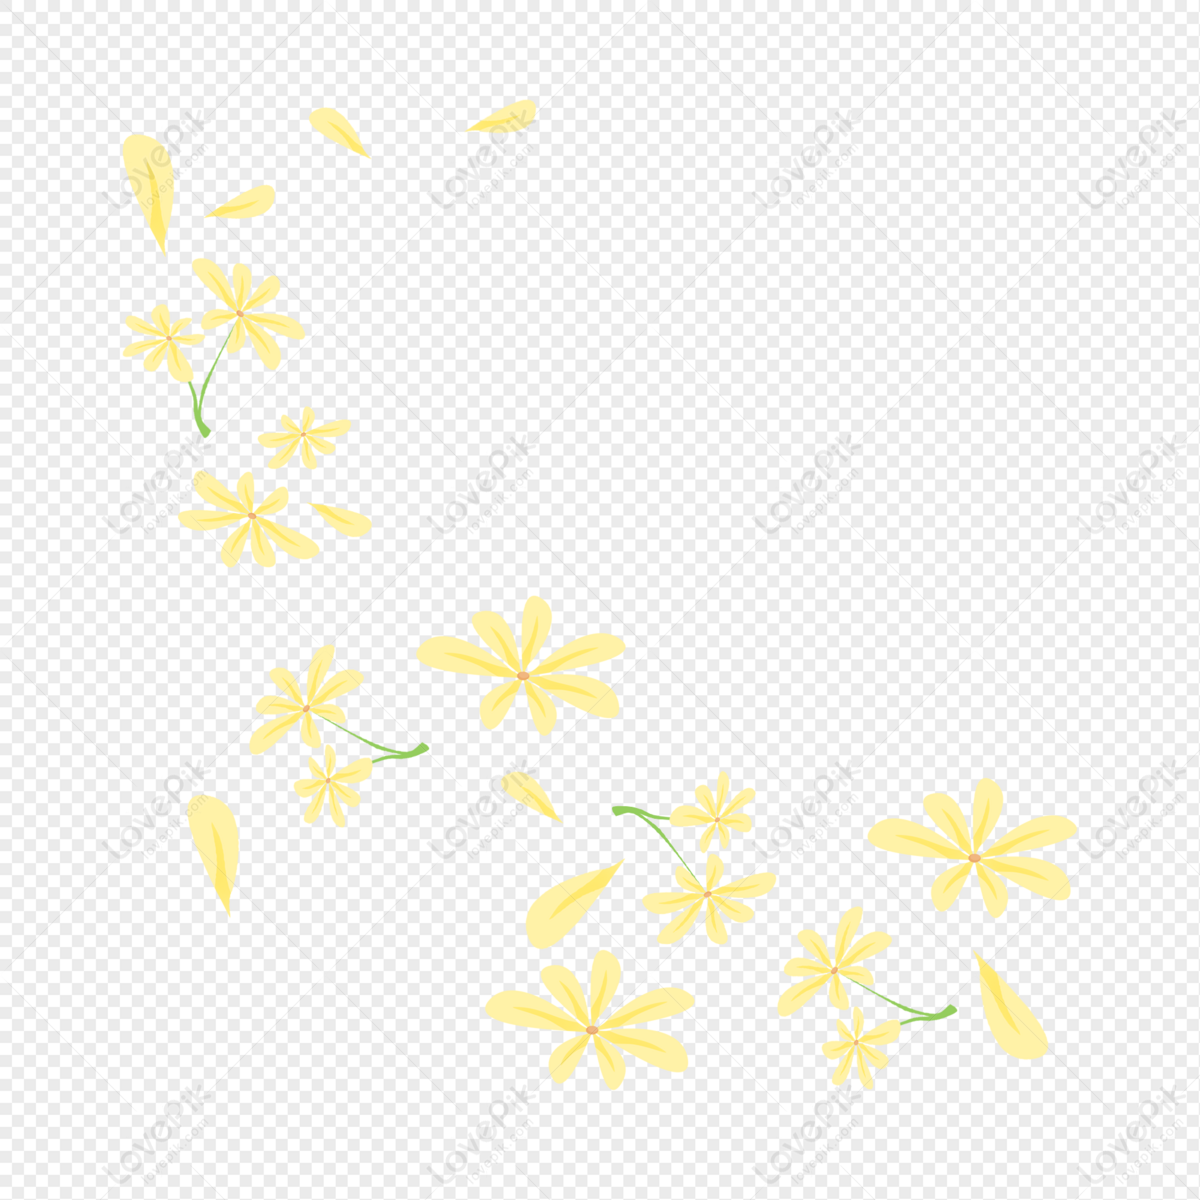 flower with petals falling